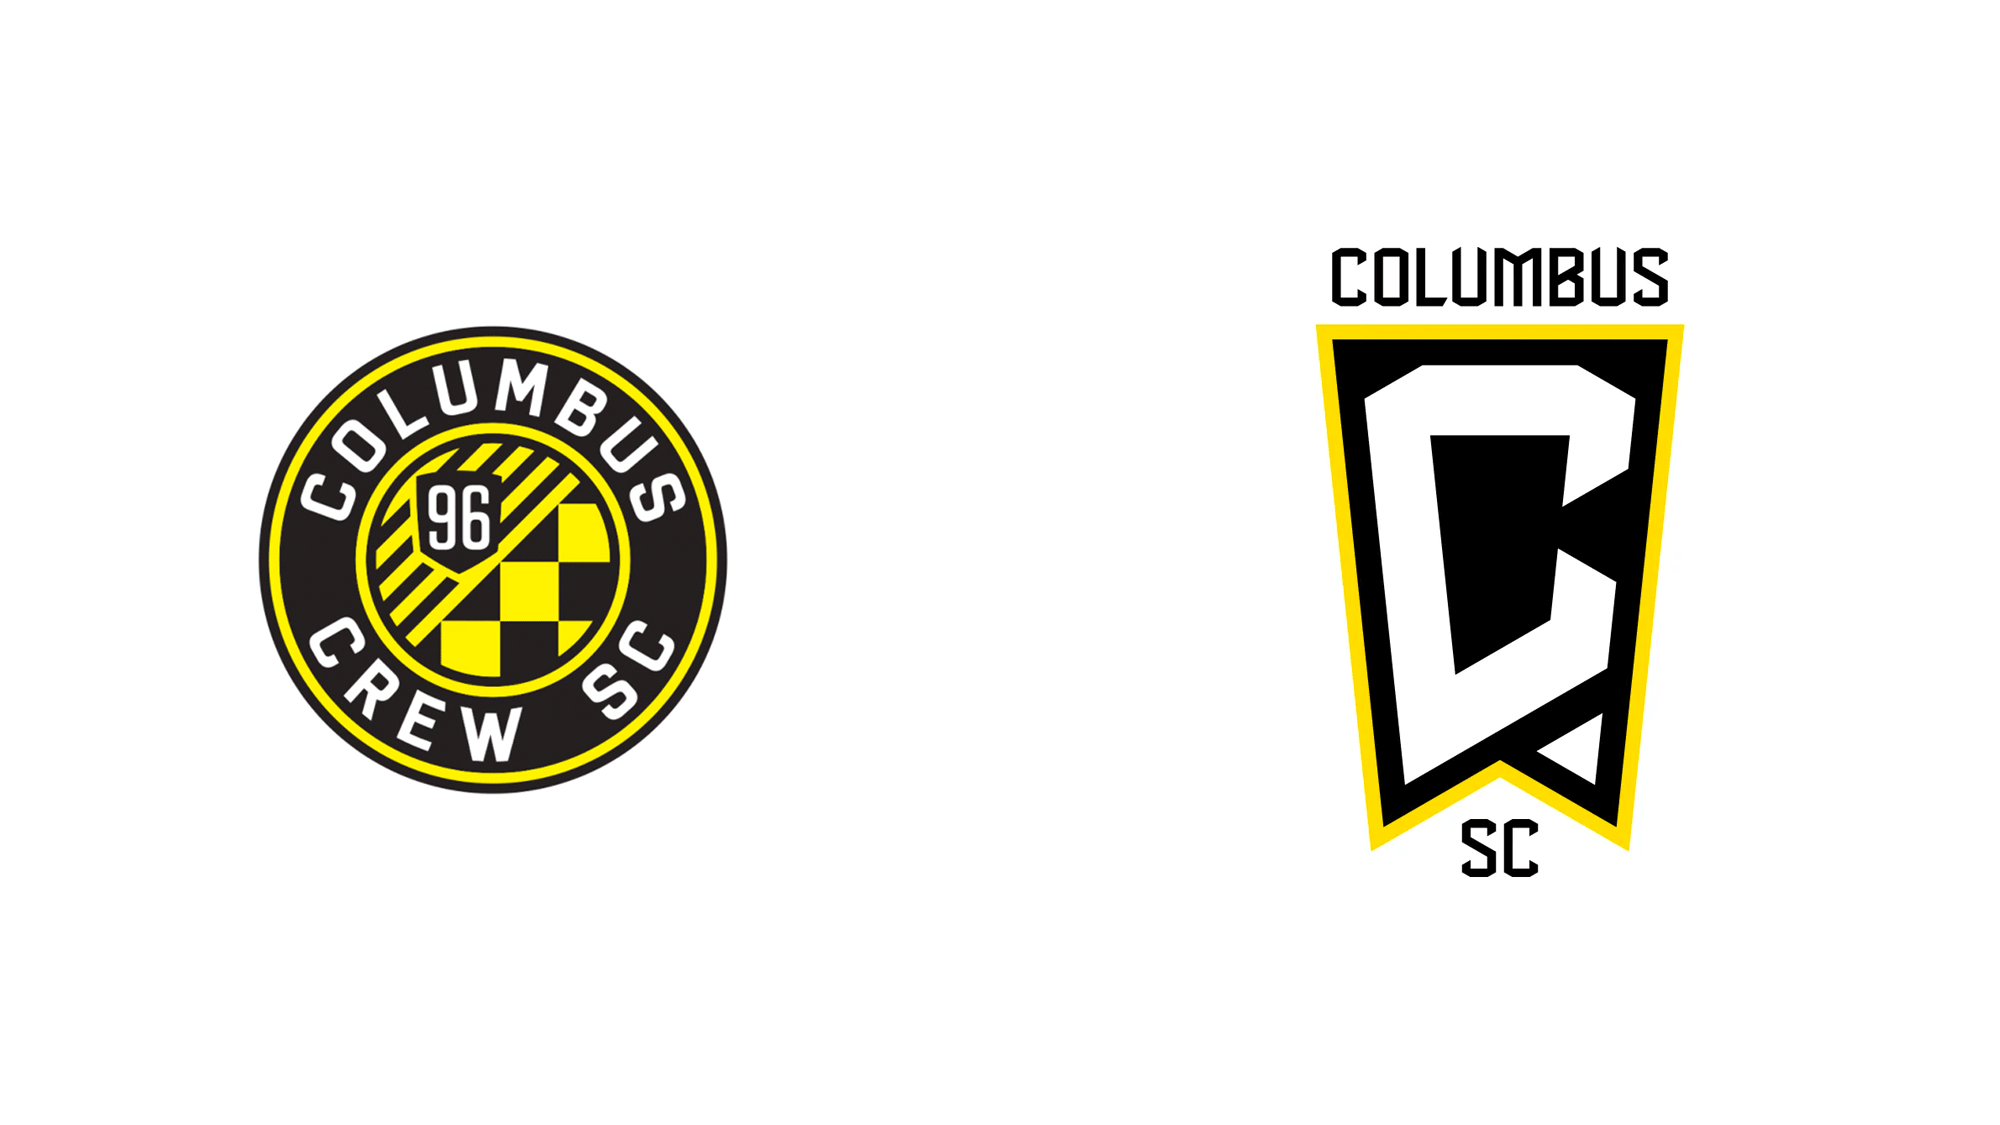 New Name and Logos for Columbus SC